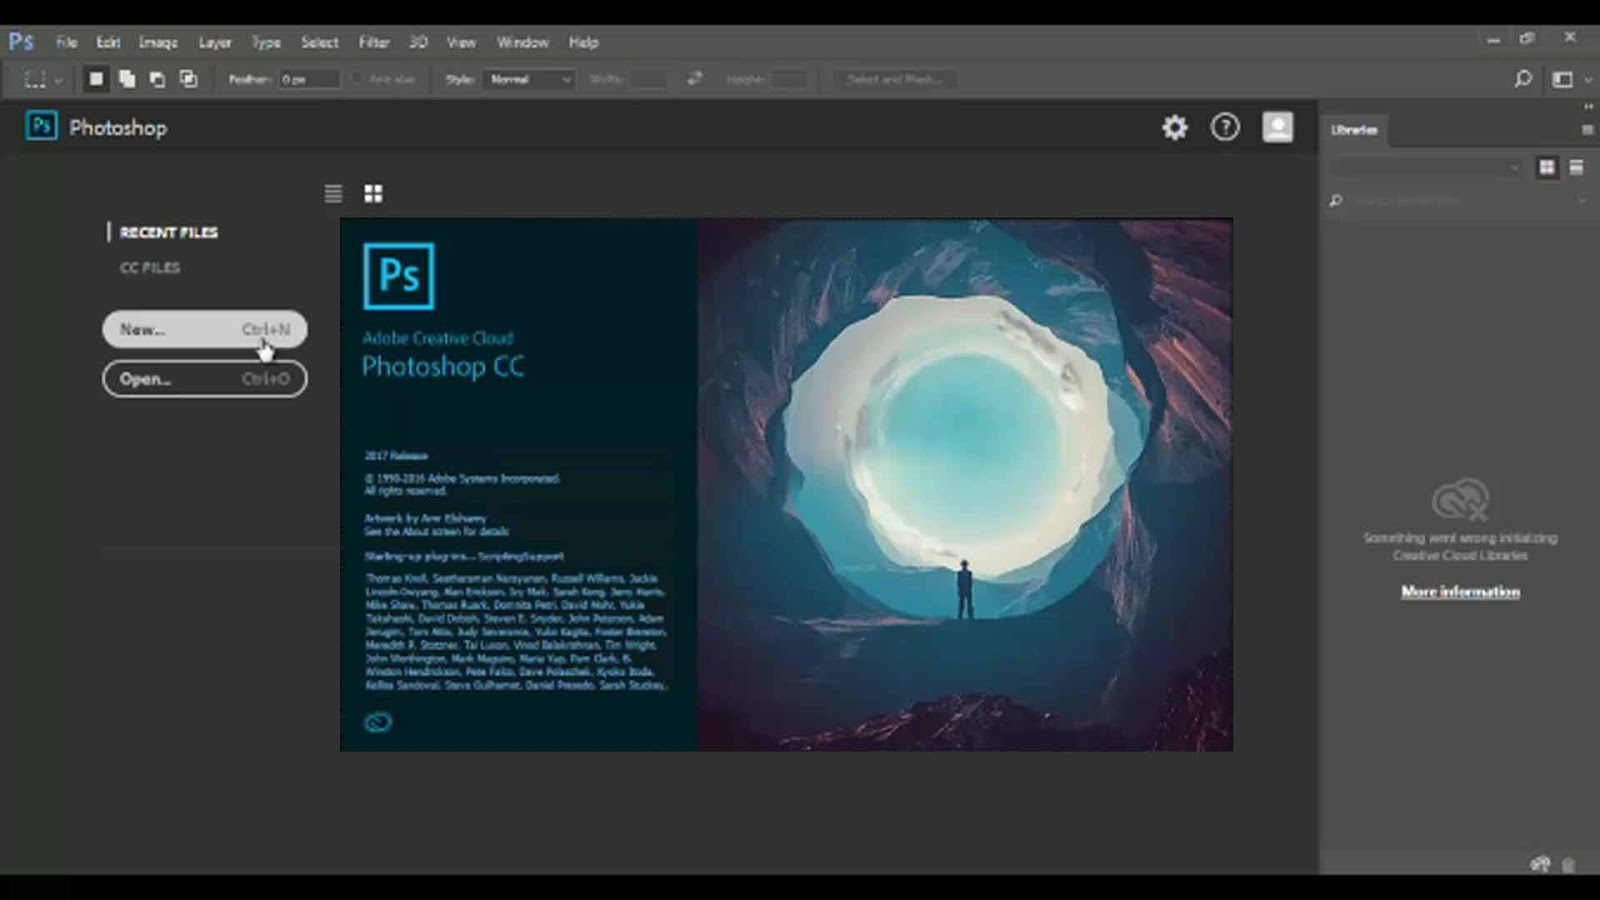 adobe photoshop 2017 free download full version for windows 7